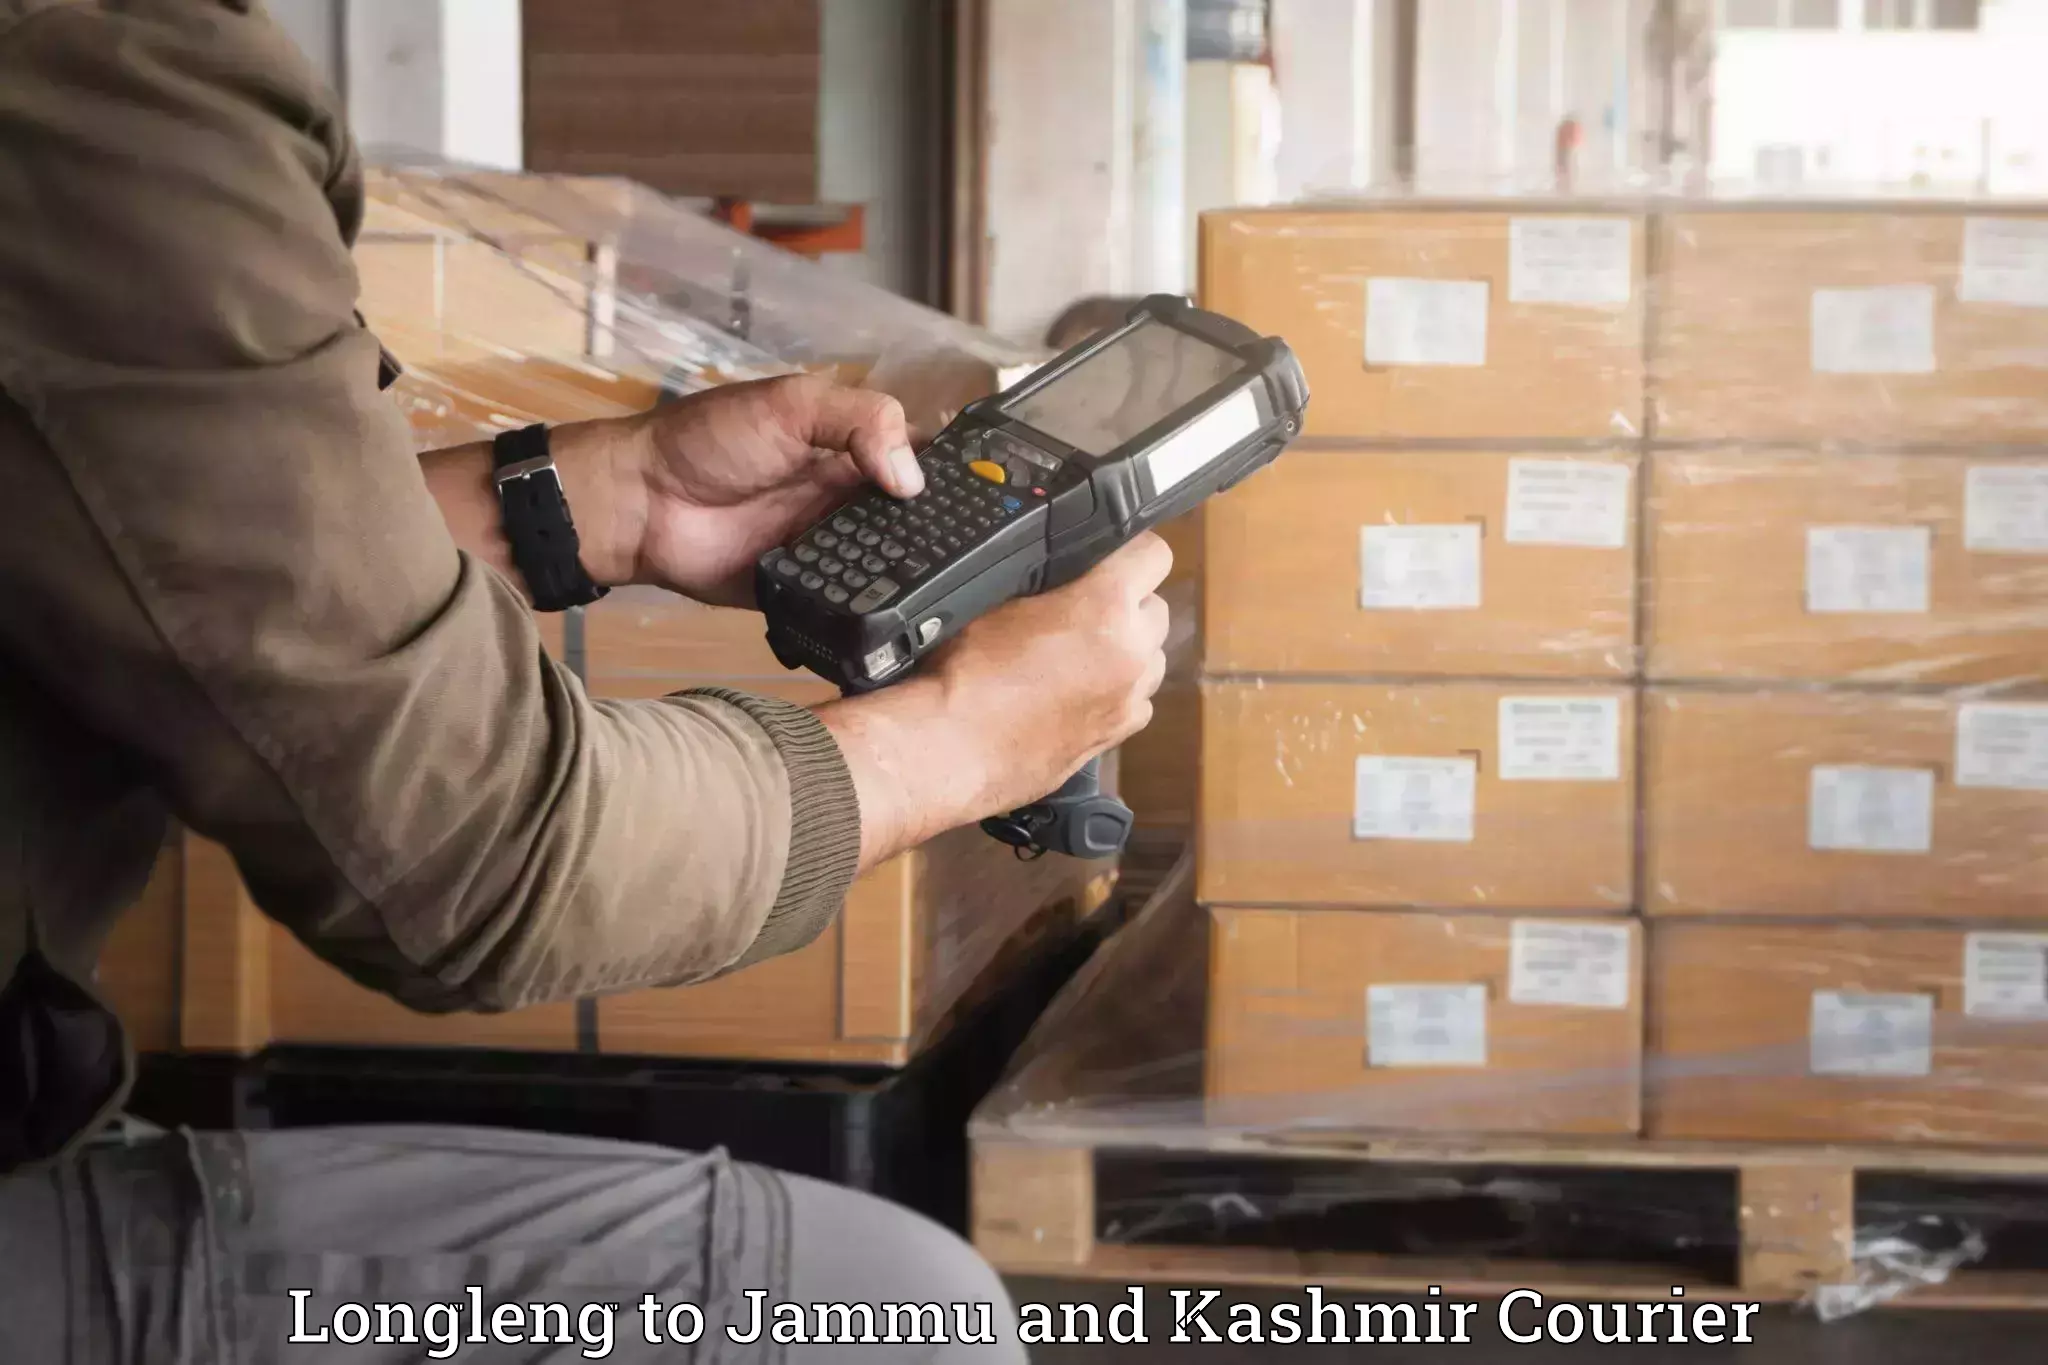 Home moving specialists Longleng to Jammu and Kashmir